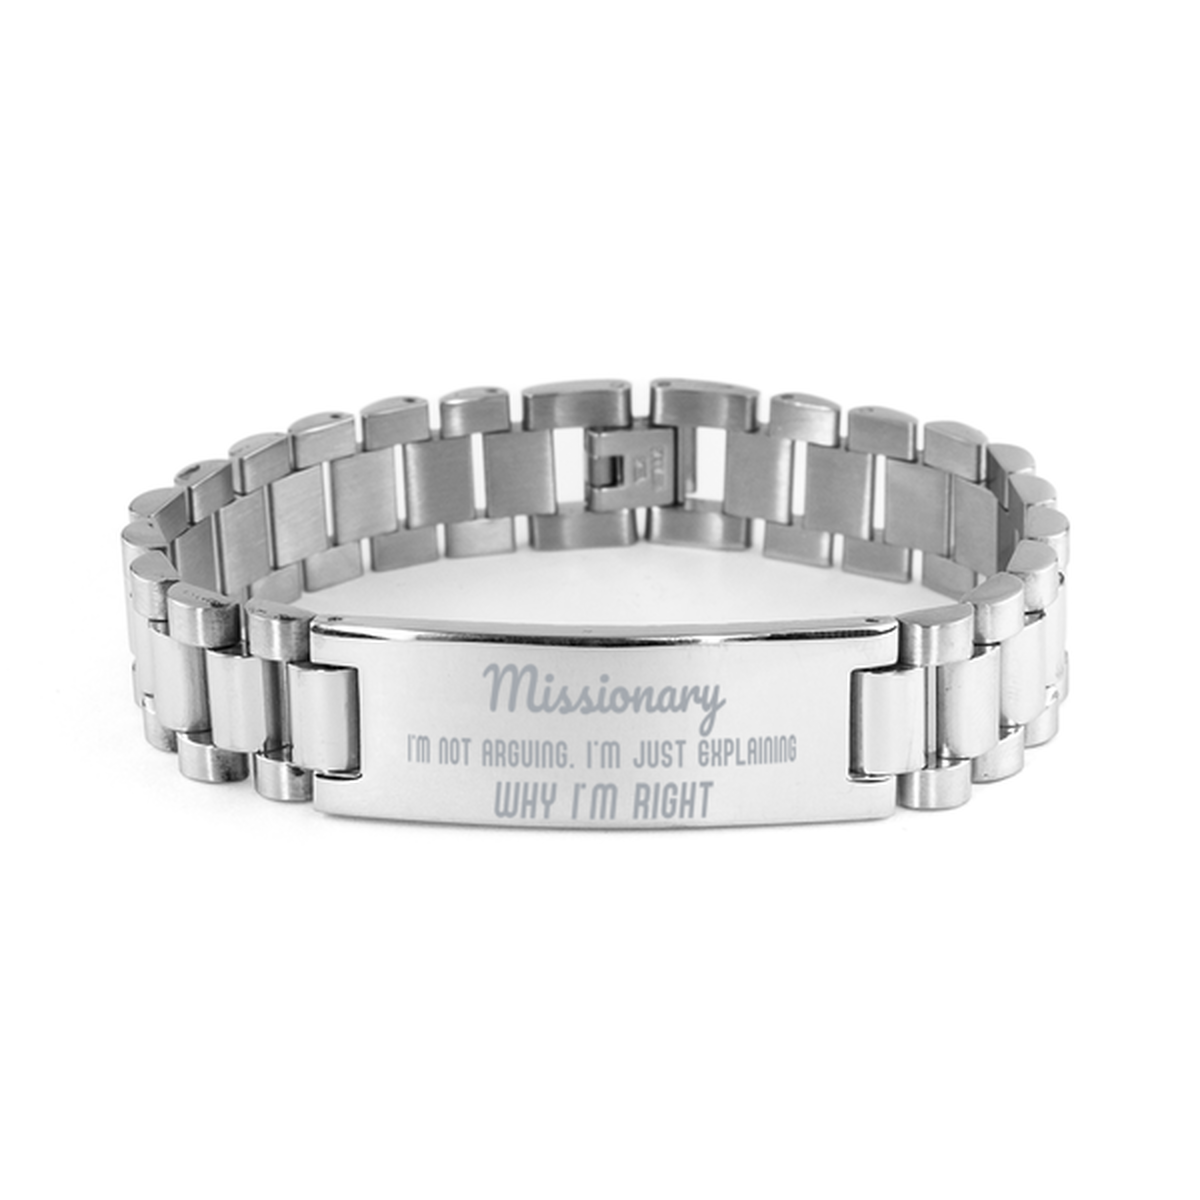 Missionary I'm not Arguing. I'm Just Explaining Why I'm RIGHT Ladder Stainless Steel Bracelet, Graduation Birthday Christmas Missionary Gifts For Missionary Funny Saying Quote Present for Men Women Coworker